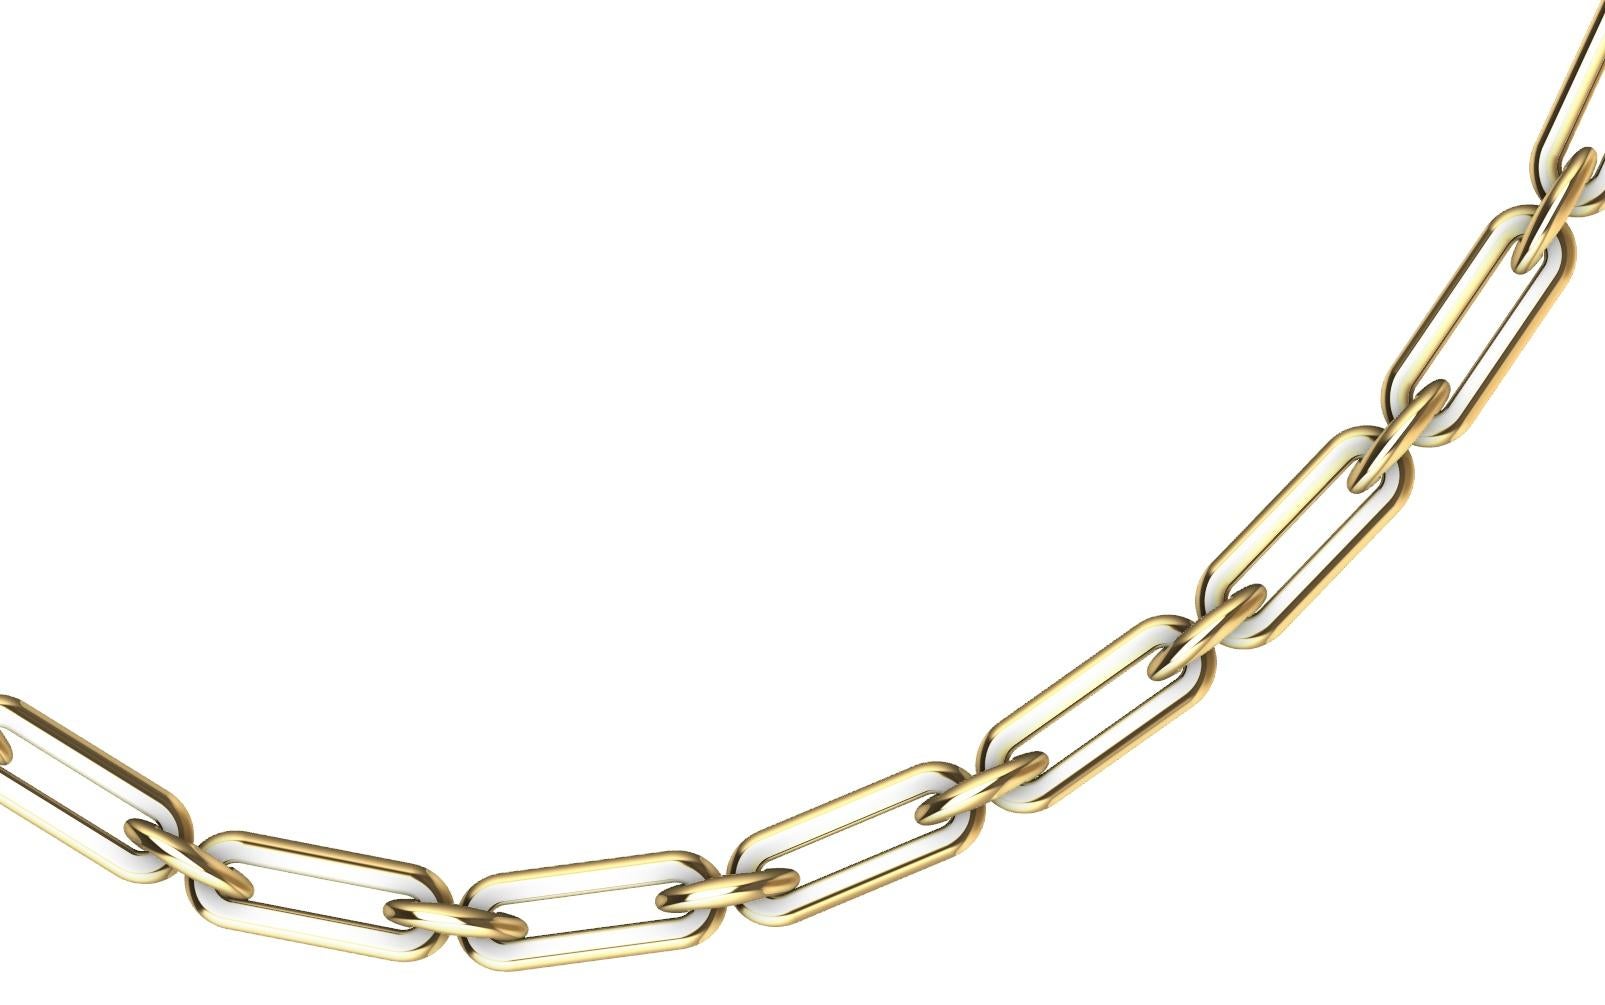 18 Karat Yellow Gold  19.75 inch Small Link Chain Necklace  , Tiffany Designer , Thomas Kurilla designed this back in the day. Tiffany's wanted to purchase this design. This was handcarved  from wax. Back in the day. And I still love to carve wax! 